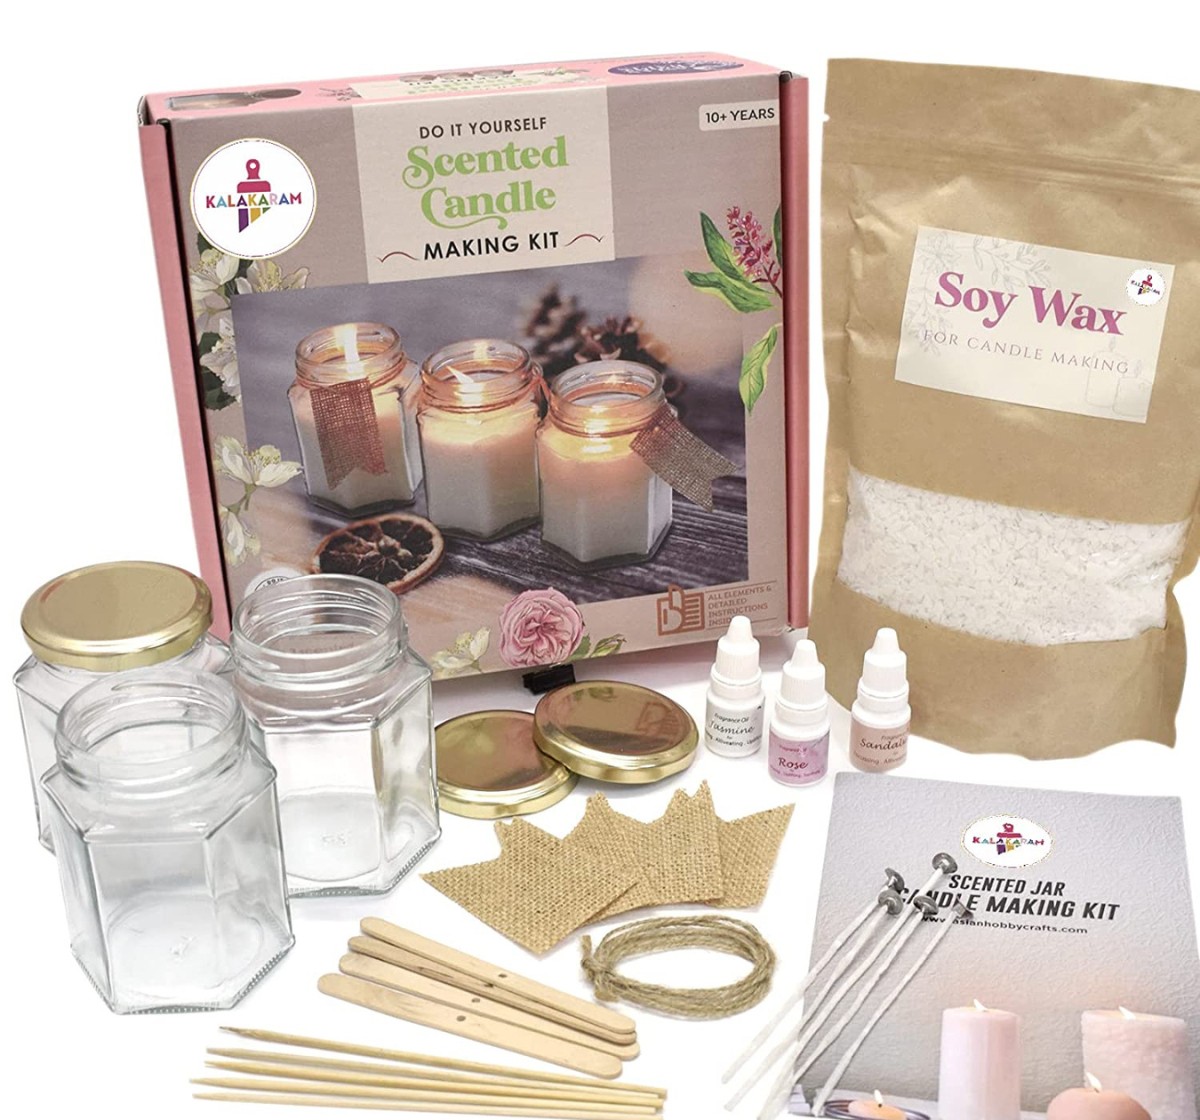 Soy Wax Melting Material Kit, Home Candle Making Material